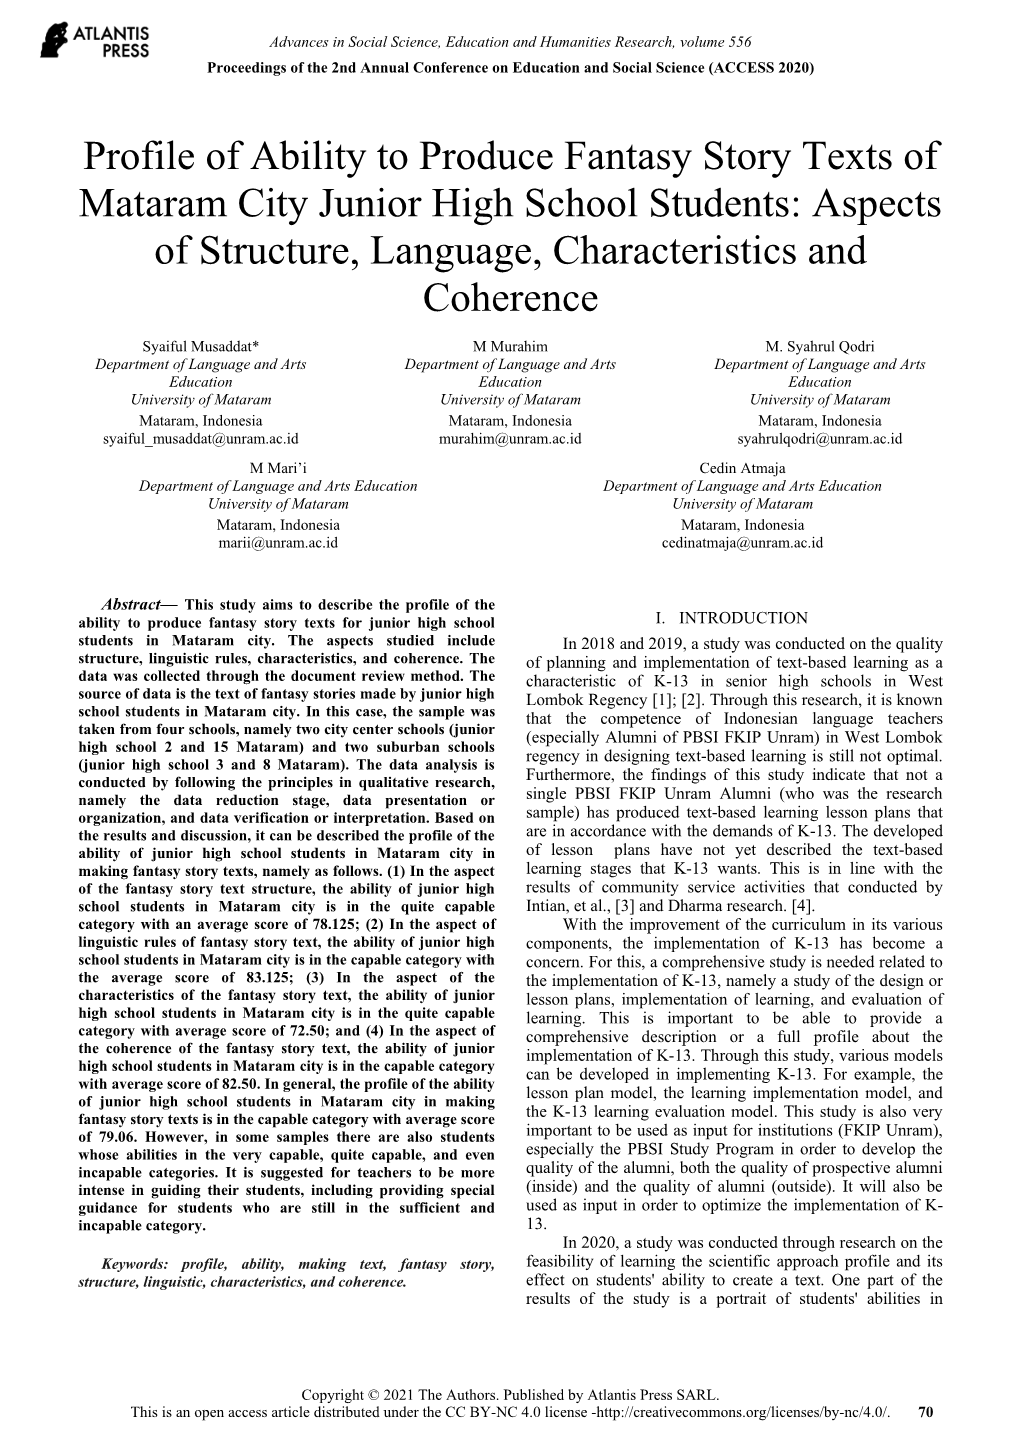 Profile of Ability to Produce Fantasy Story Texts of Mataram City Junior High School Students: Aspects of Structure, Language, Characteristics and Coherence